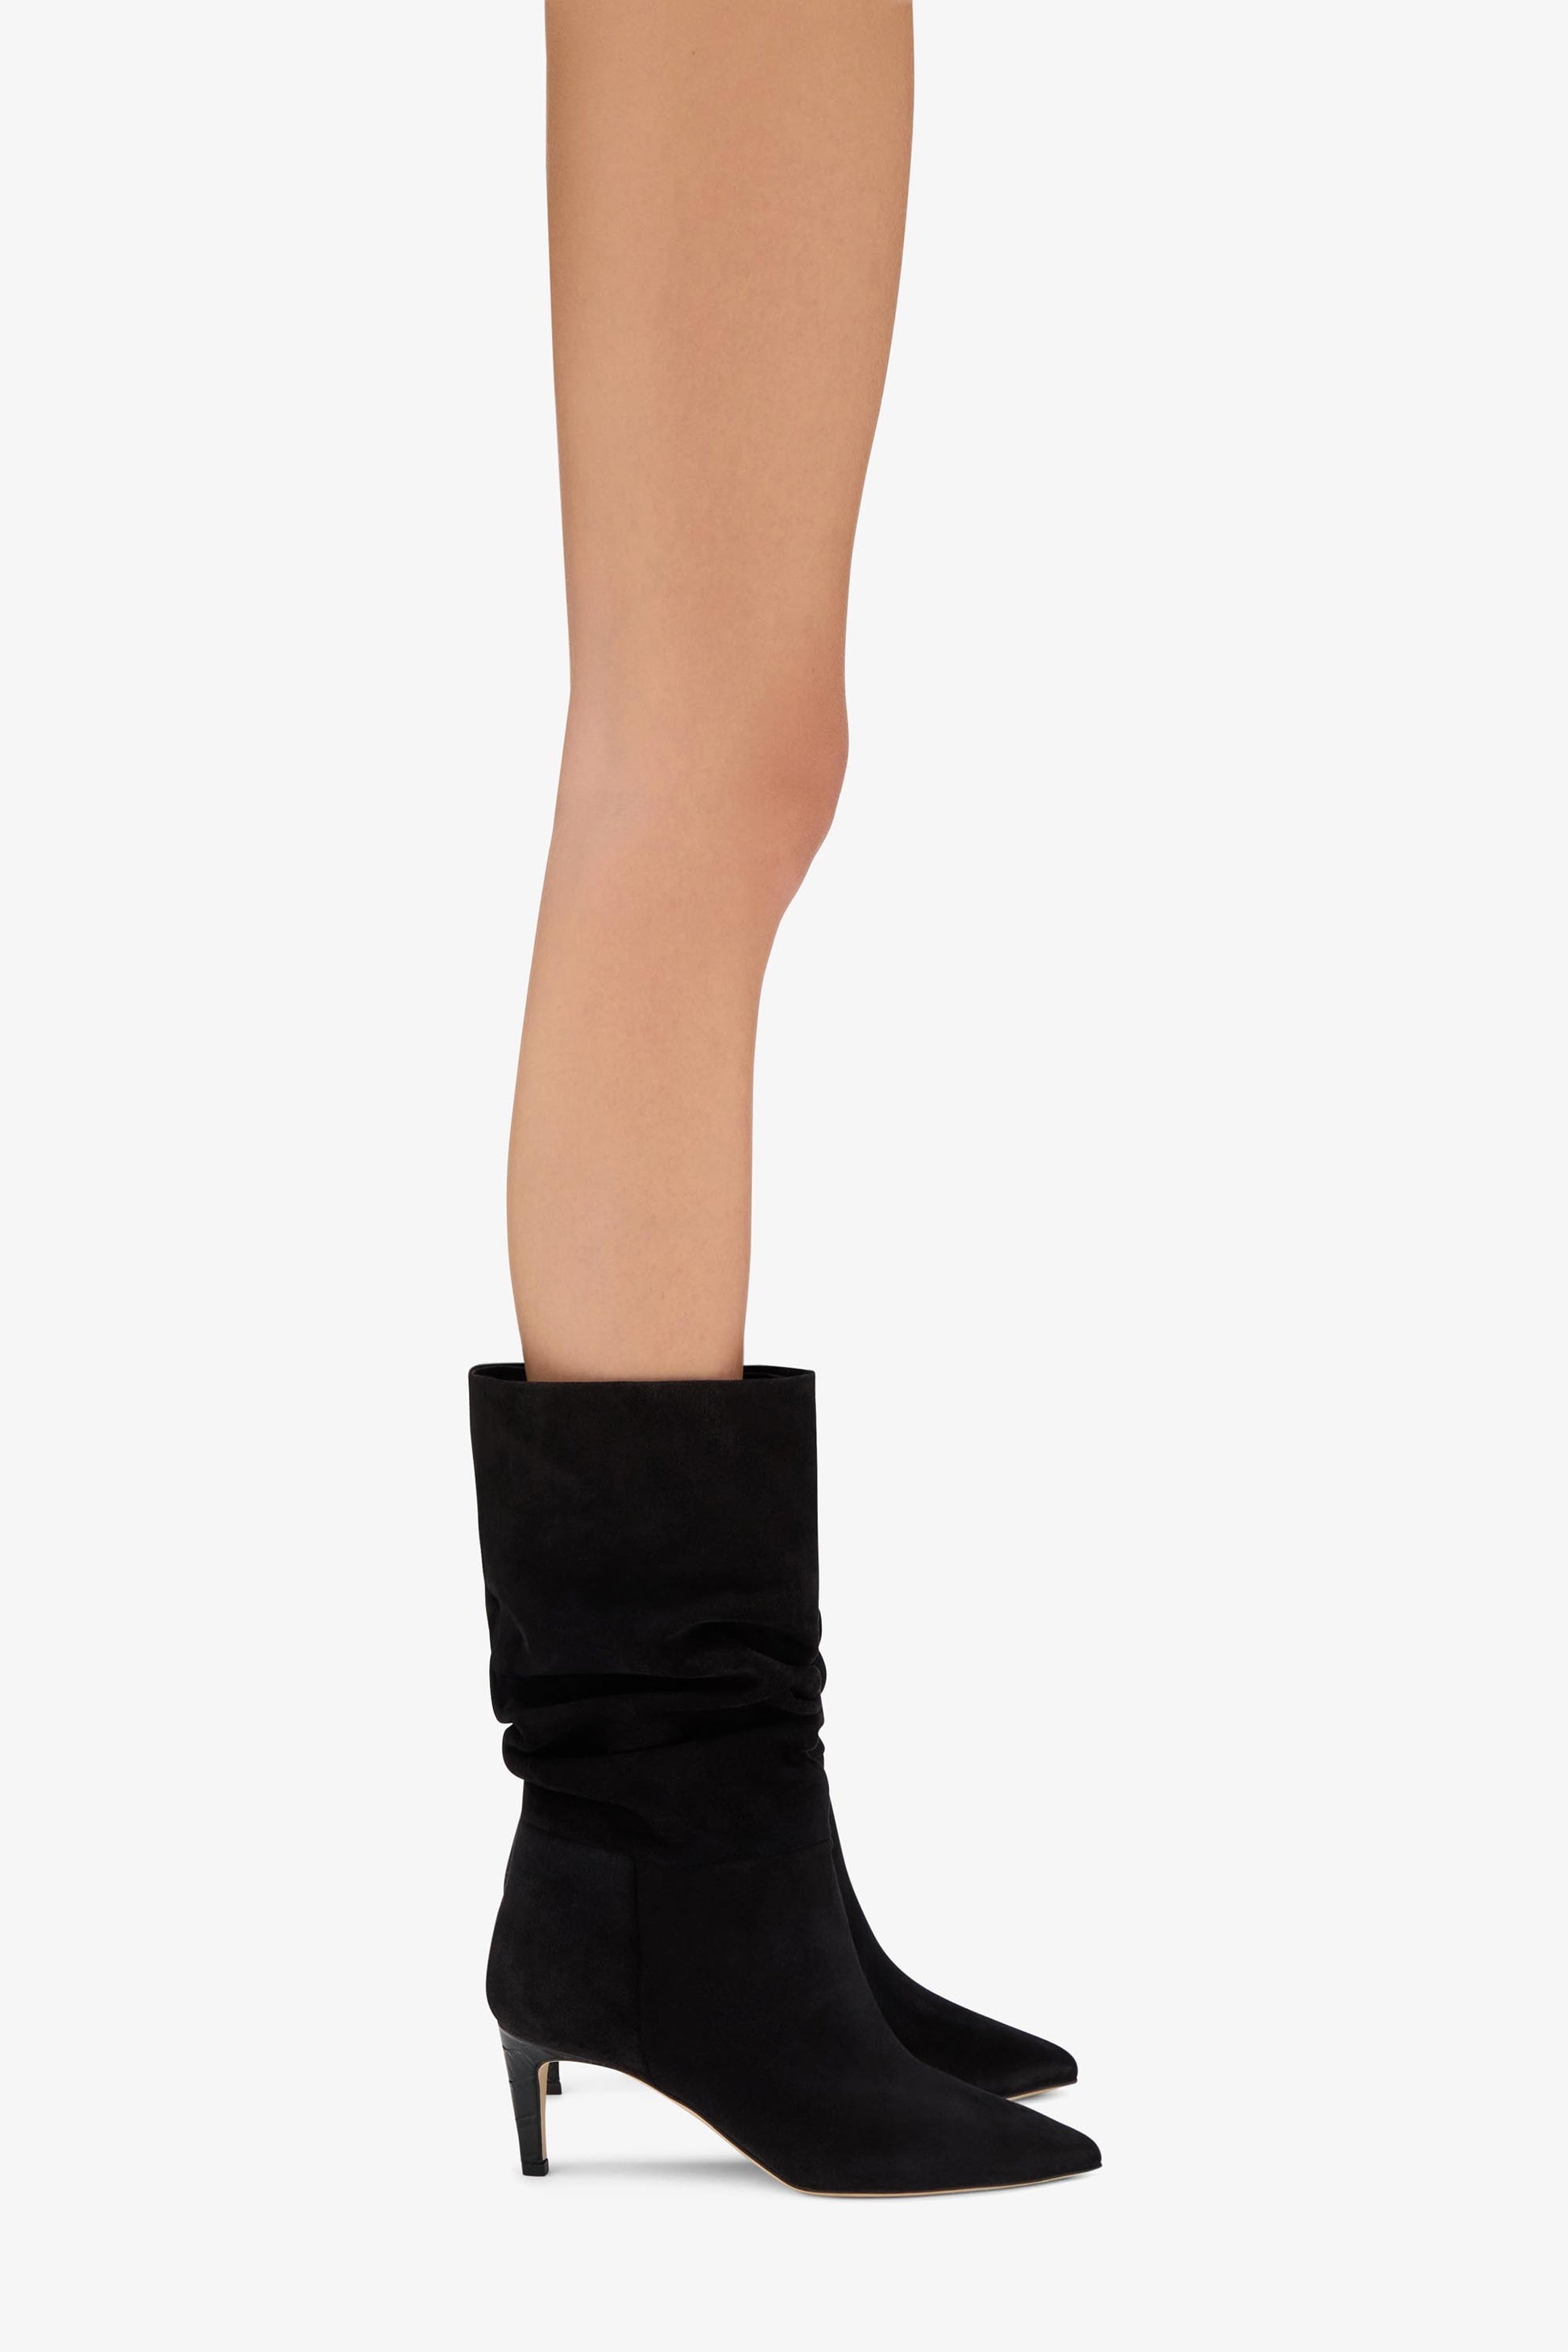 Black calf suede heel 60 slouchy boots - Product worn